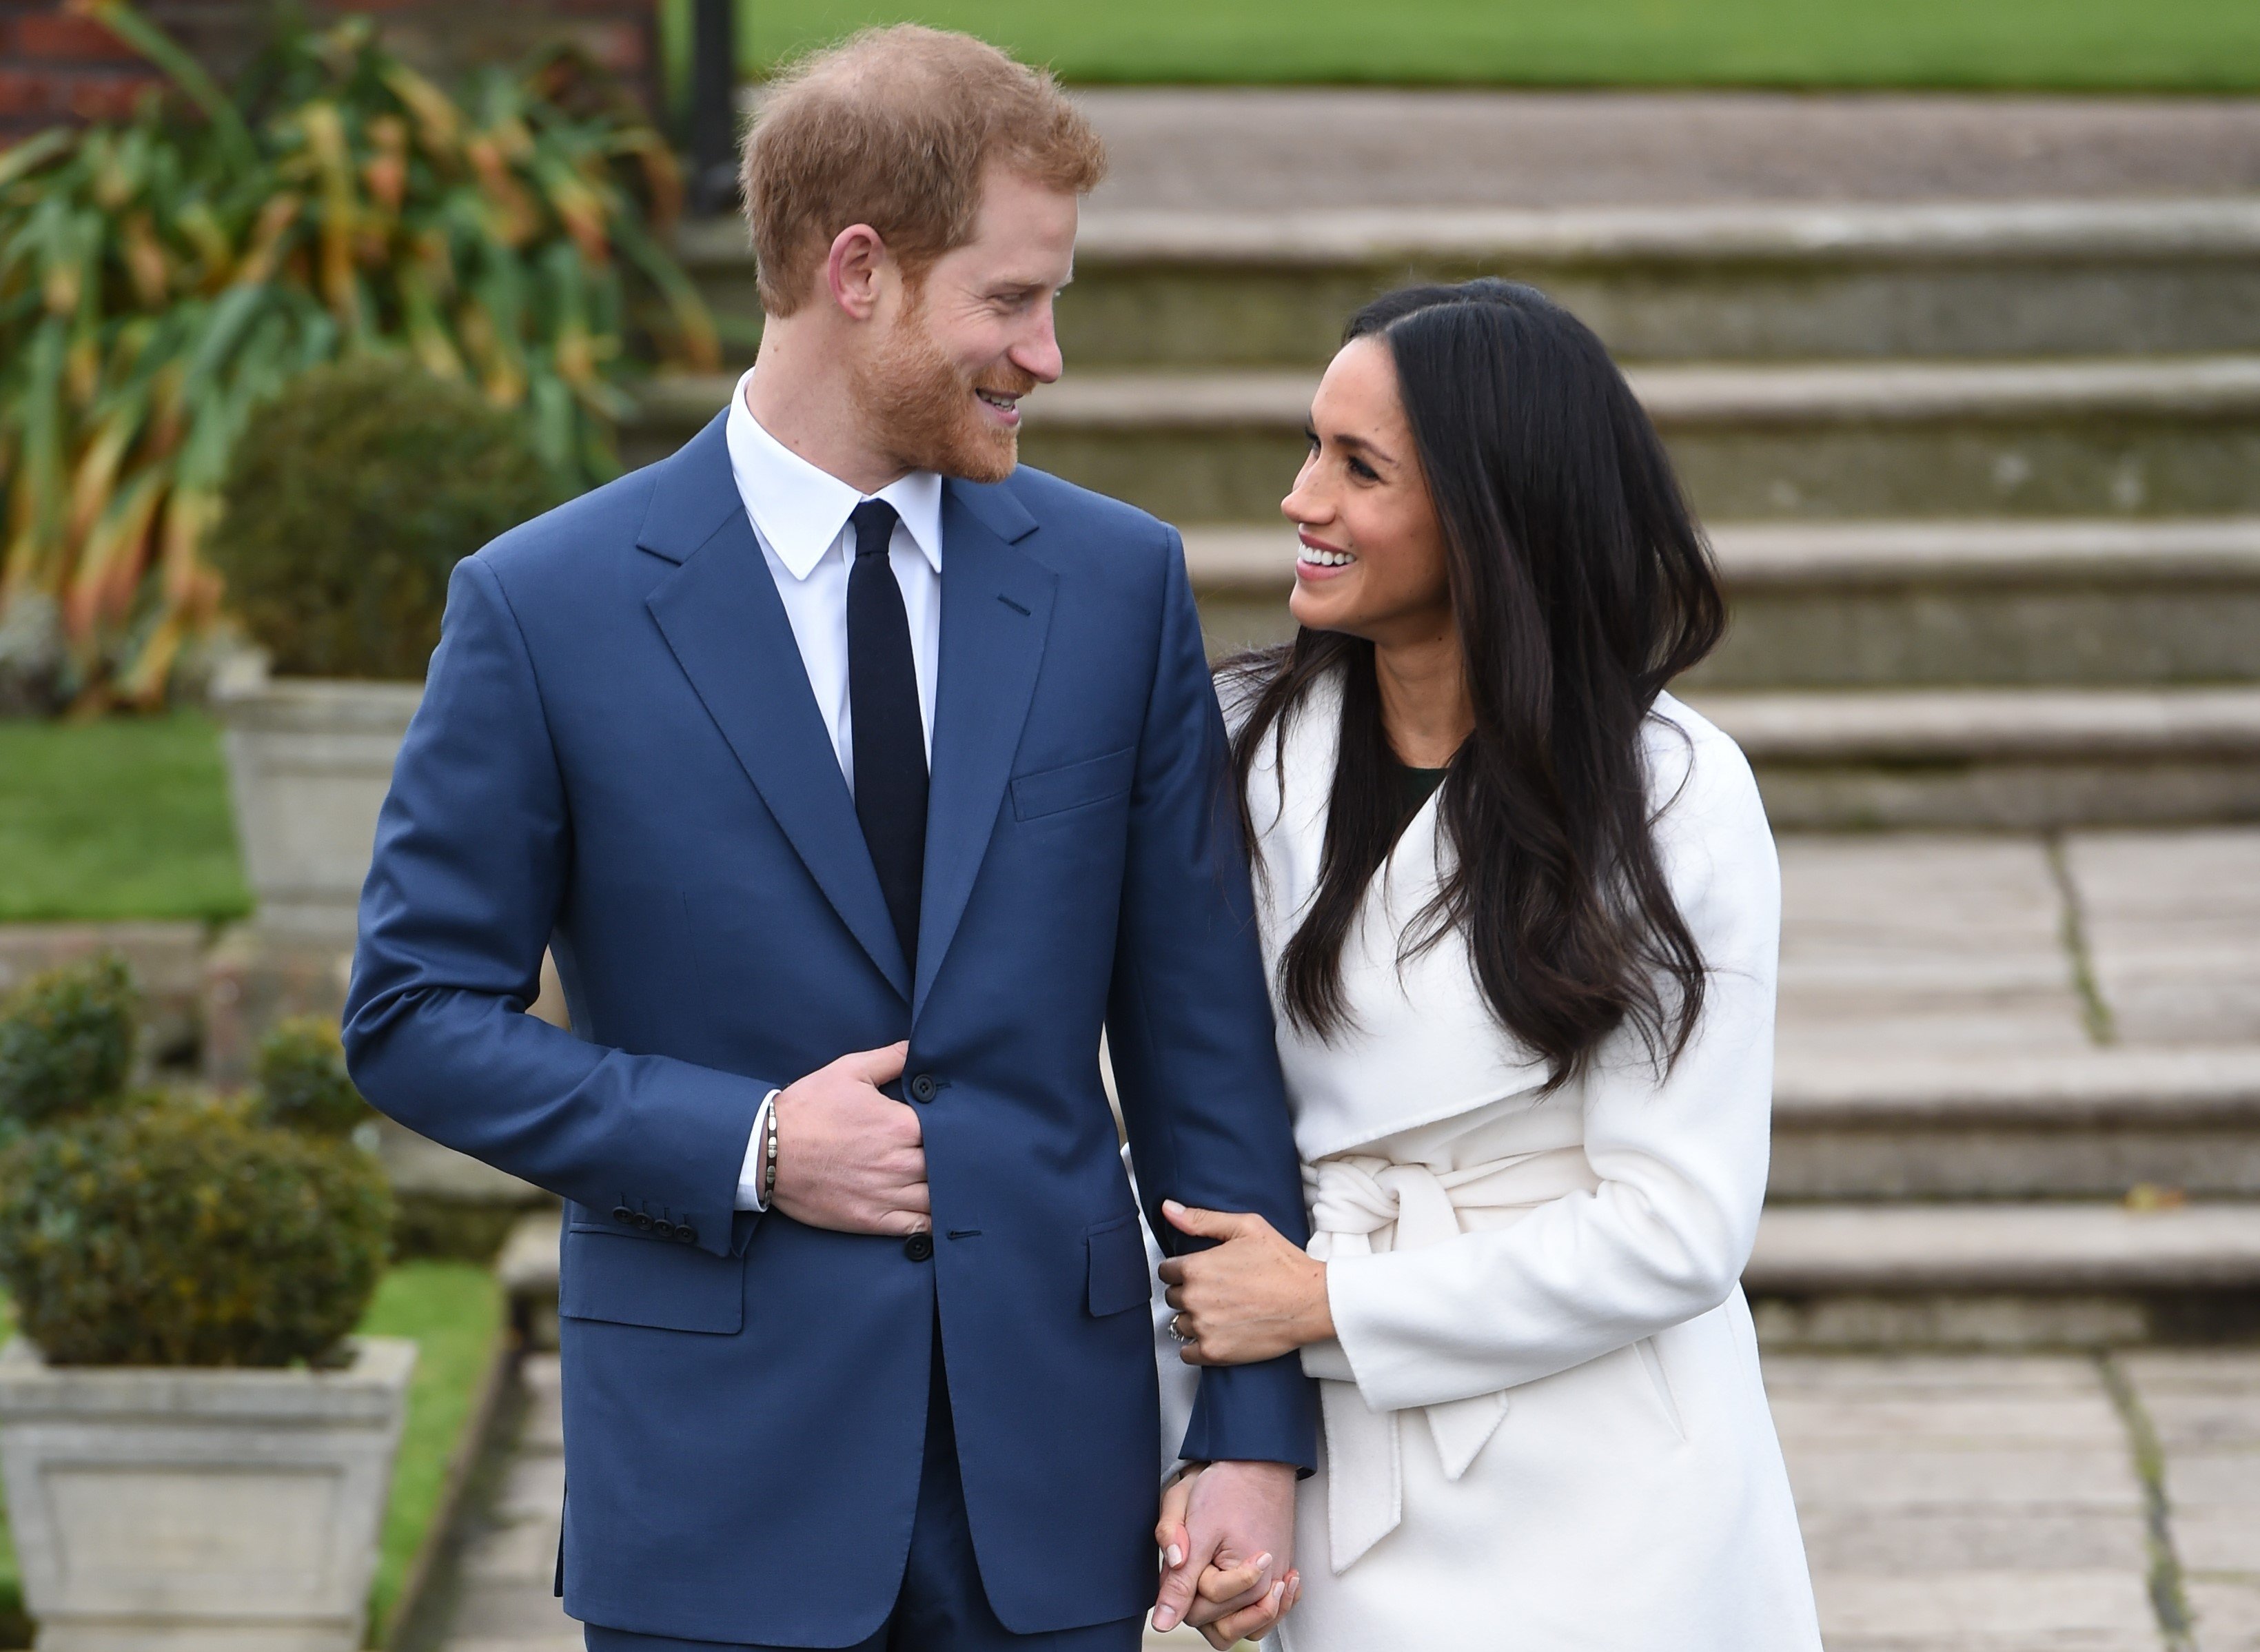 Prince Harry and Meghan Markle holding hands and standing arm-in-arm during photocall